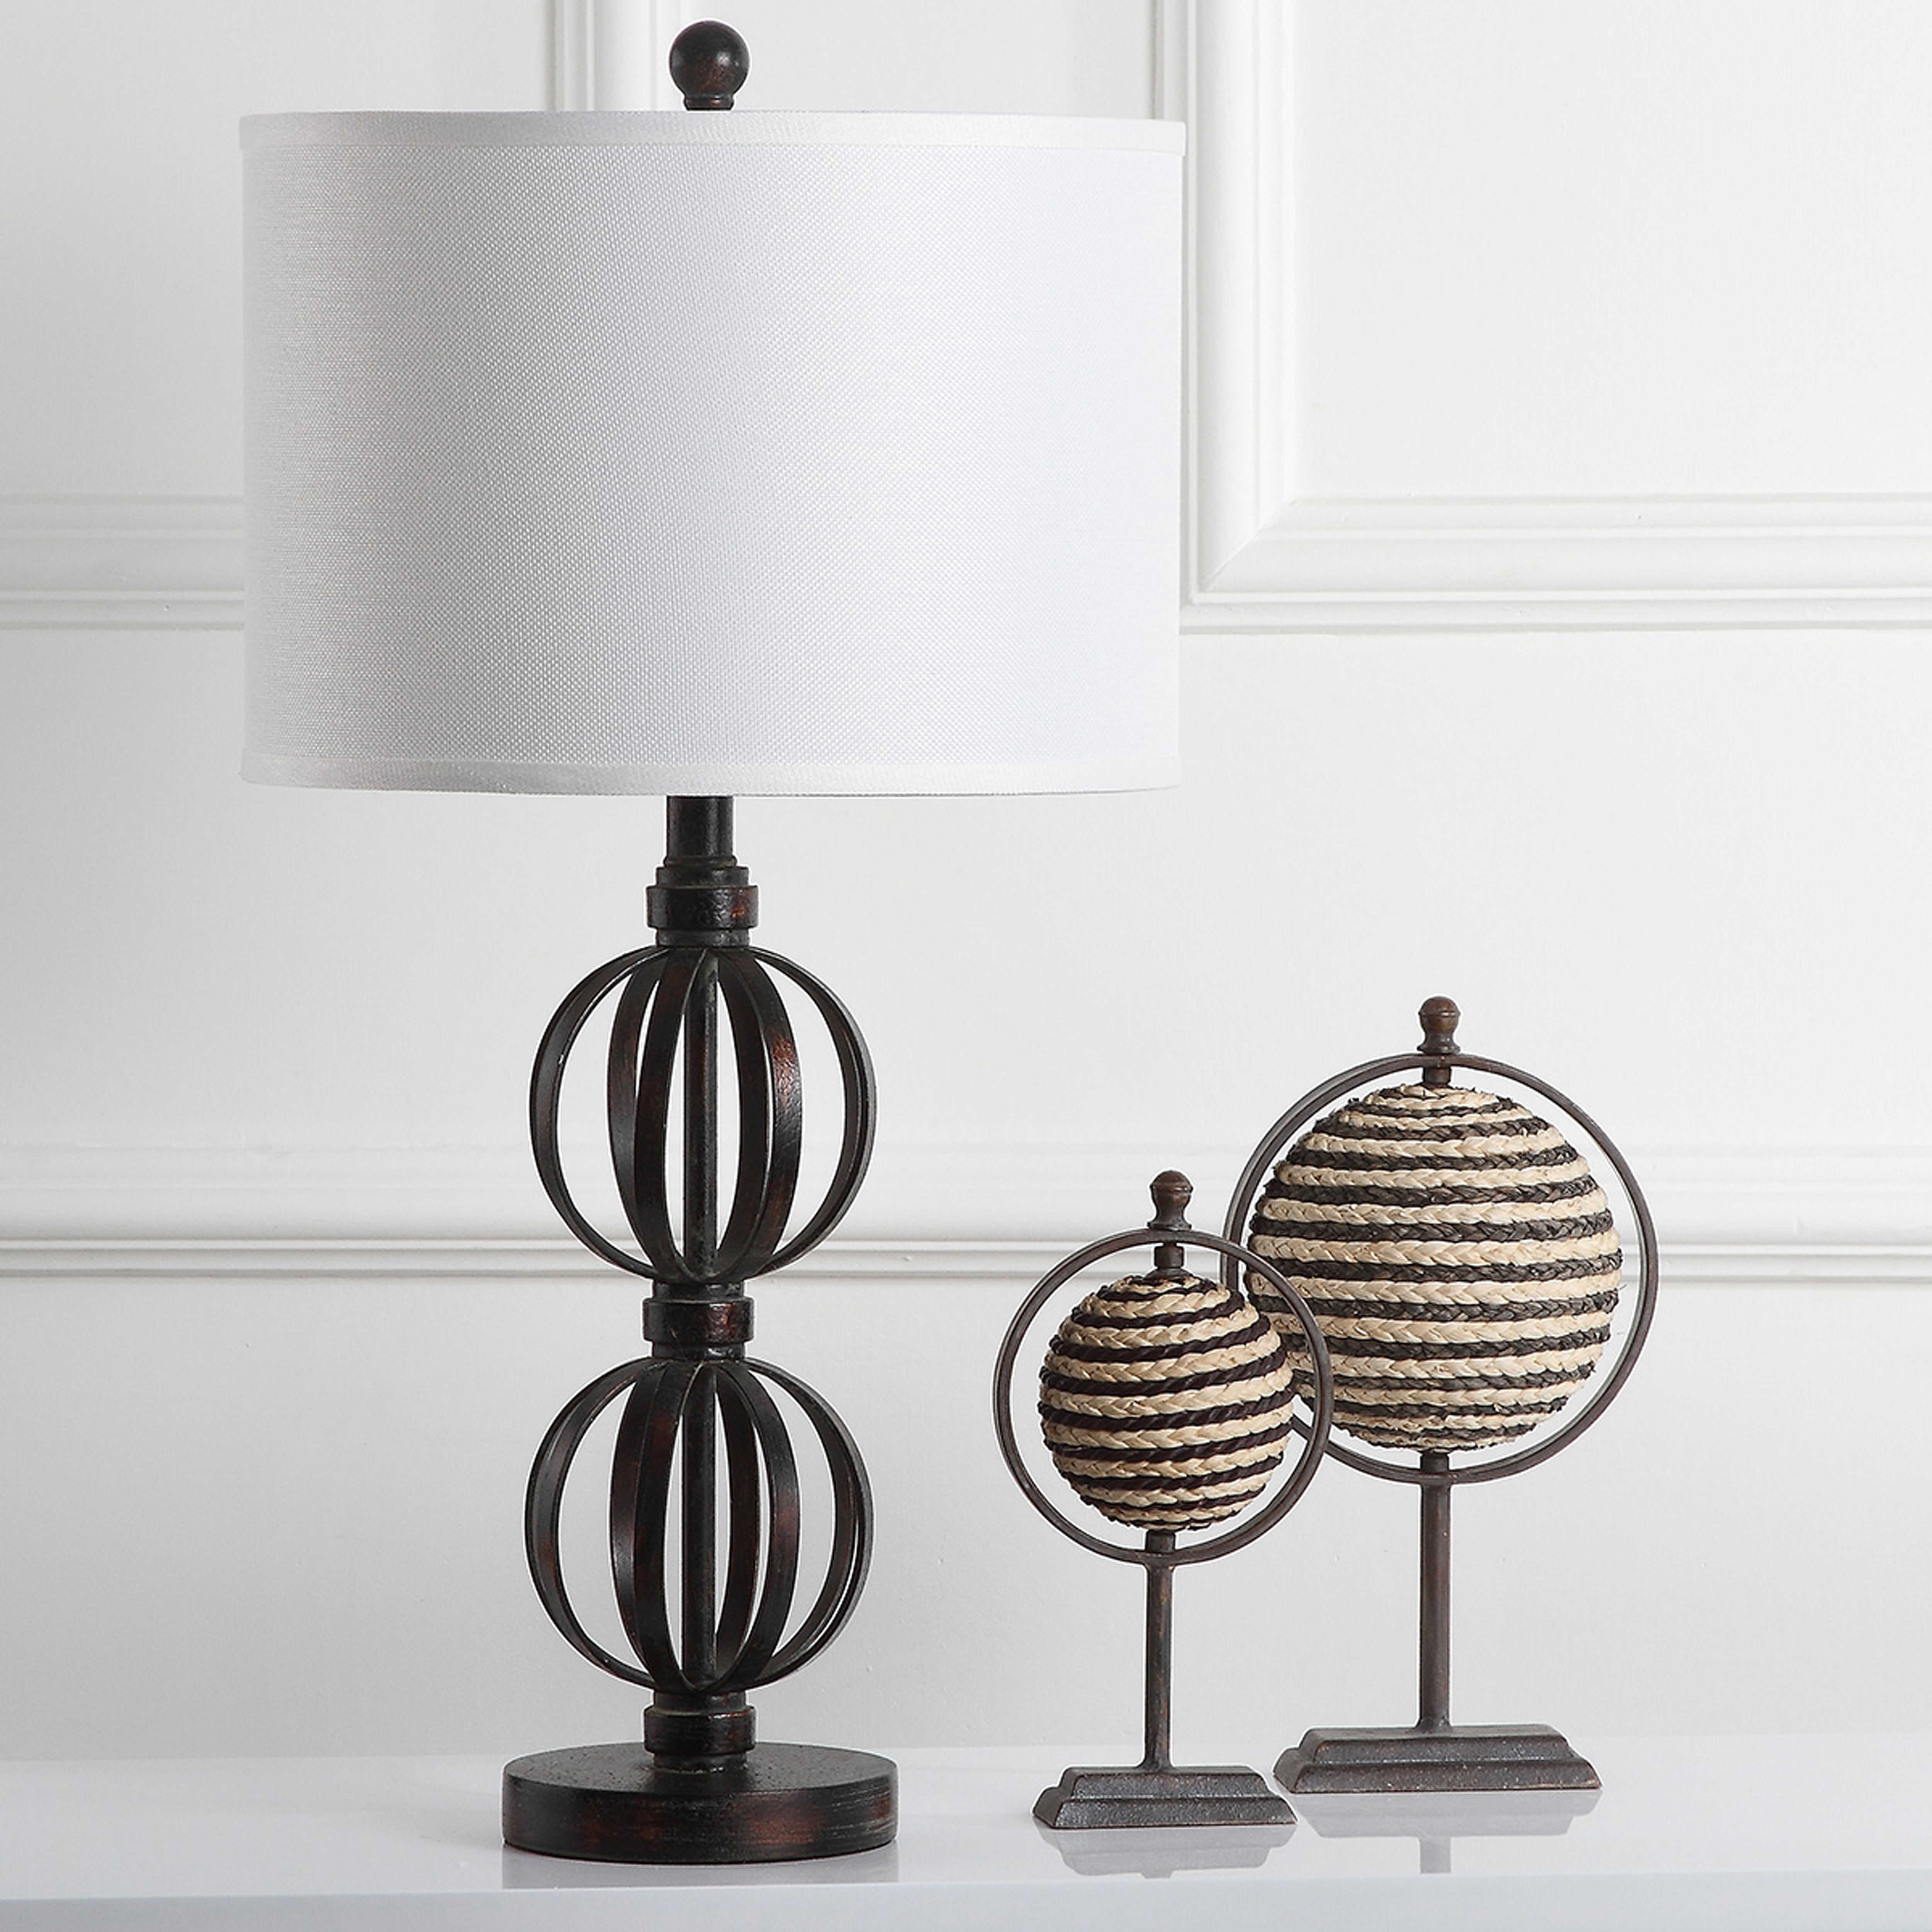 Calista 27.75-Inch H Double Sphere Table Lamp - Oil-Rubbed Bronze - Arlo Home - Image 1